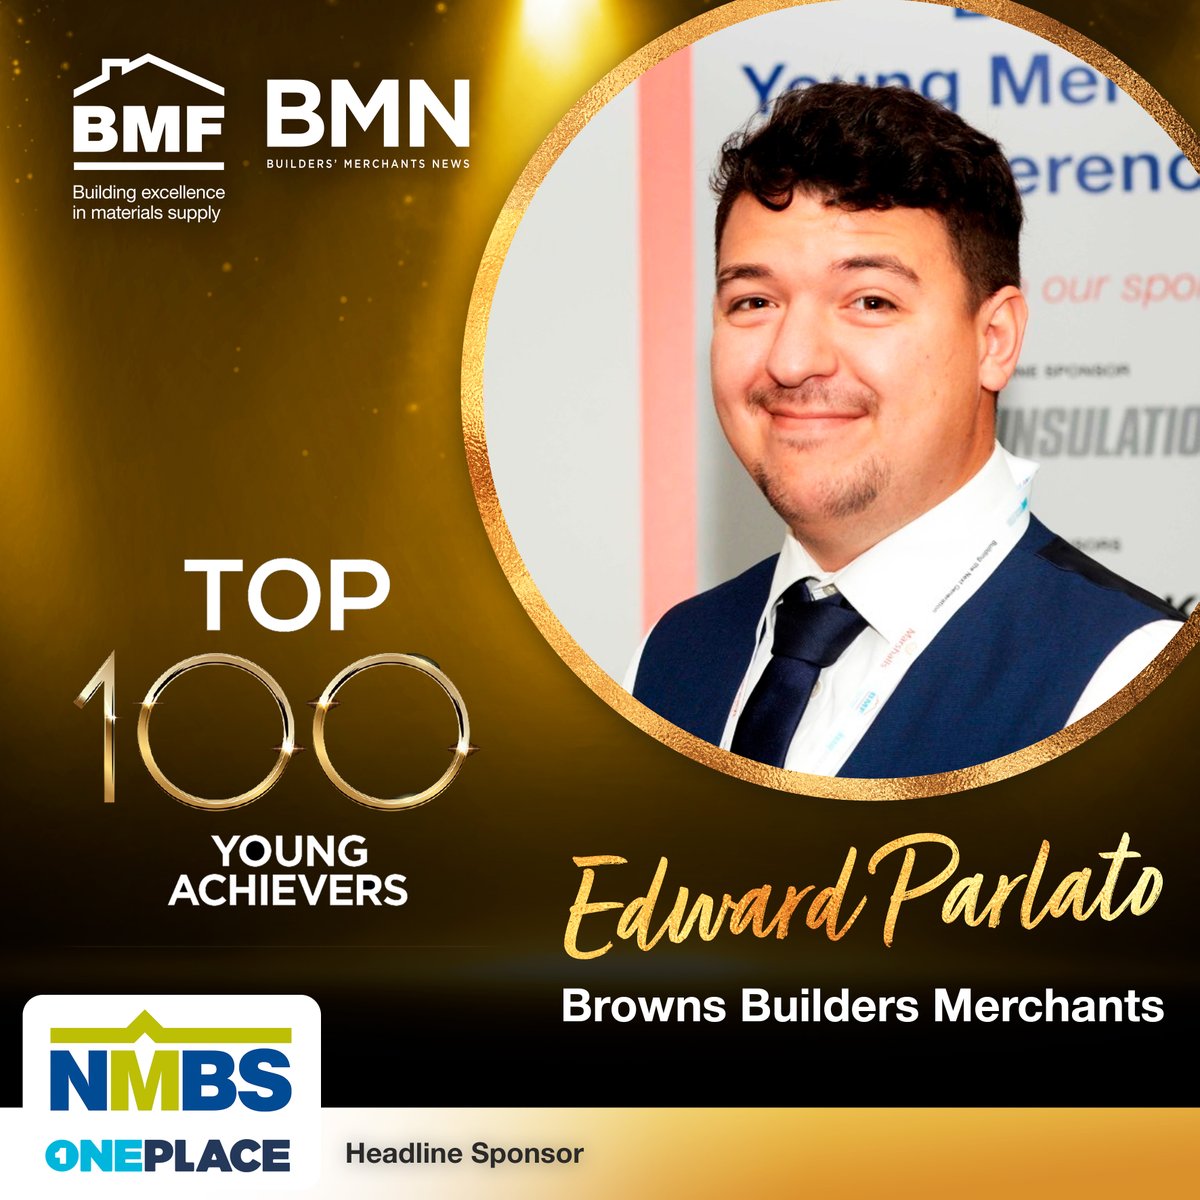 Edward Parlato, Branch Manager at @Brownsbm, is our next Top 100 Young Achievers. Head sponsor, @NationalMerch #Top100YoungAchiever @BMerchantsNews